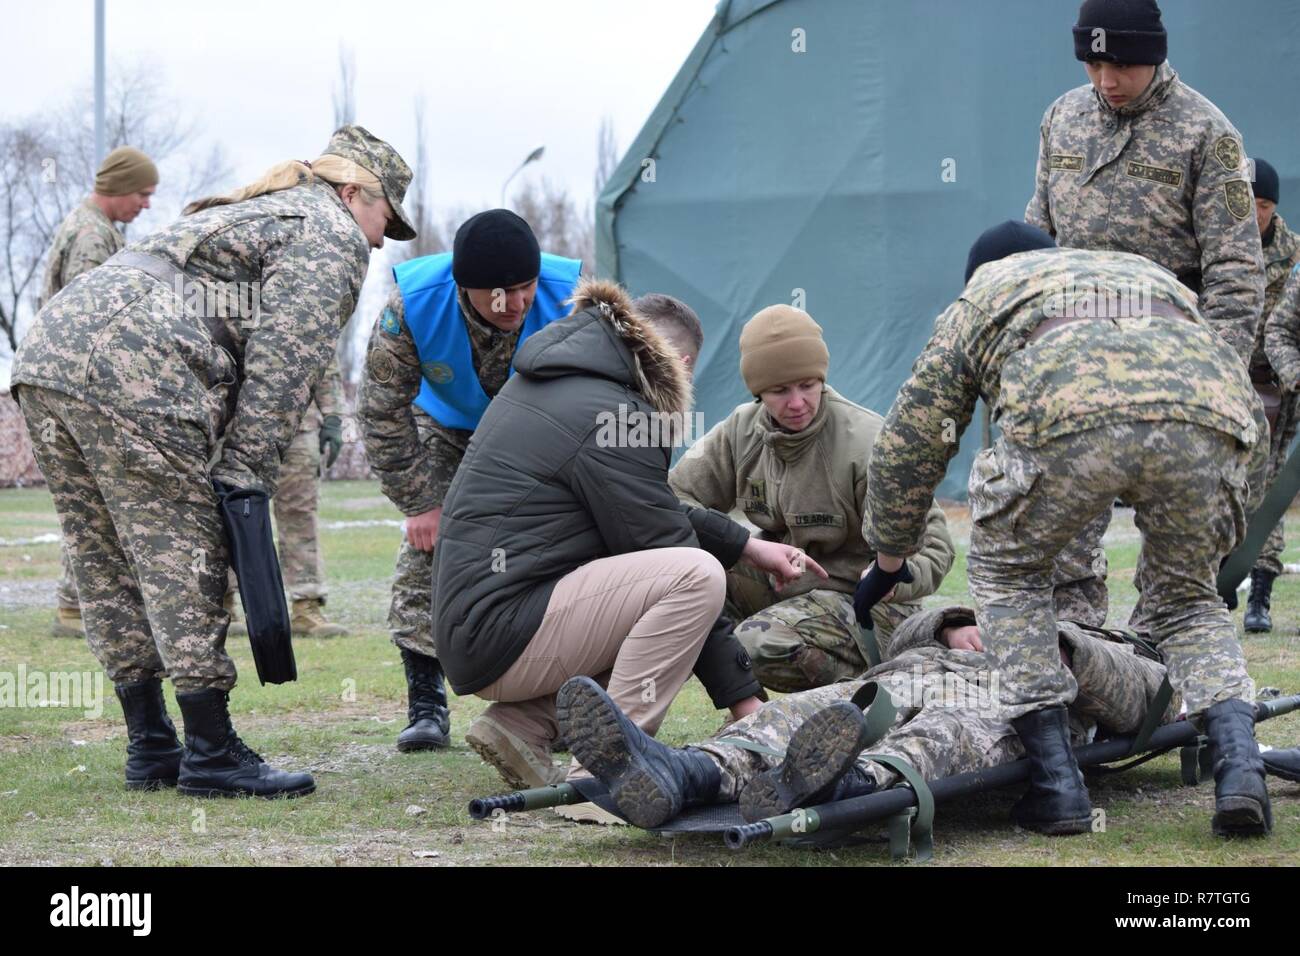 A U.S. Army Soldier with 31st Combat Support Hospital shows a Kazakhstani medic with the Kazakhstan Peacekeeping Battalion how to properly secure a patient in a litter during Steppe Eagle Koktem, Apr. 3, 2017 at Illisky Training Center, Kazakhstan. Stock Photo